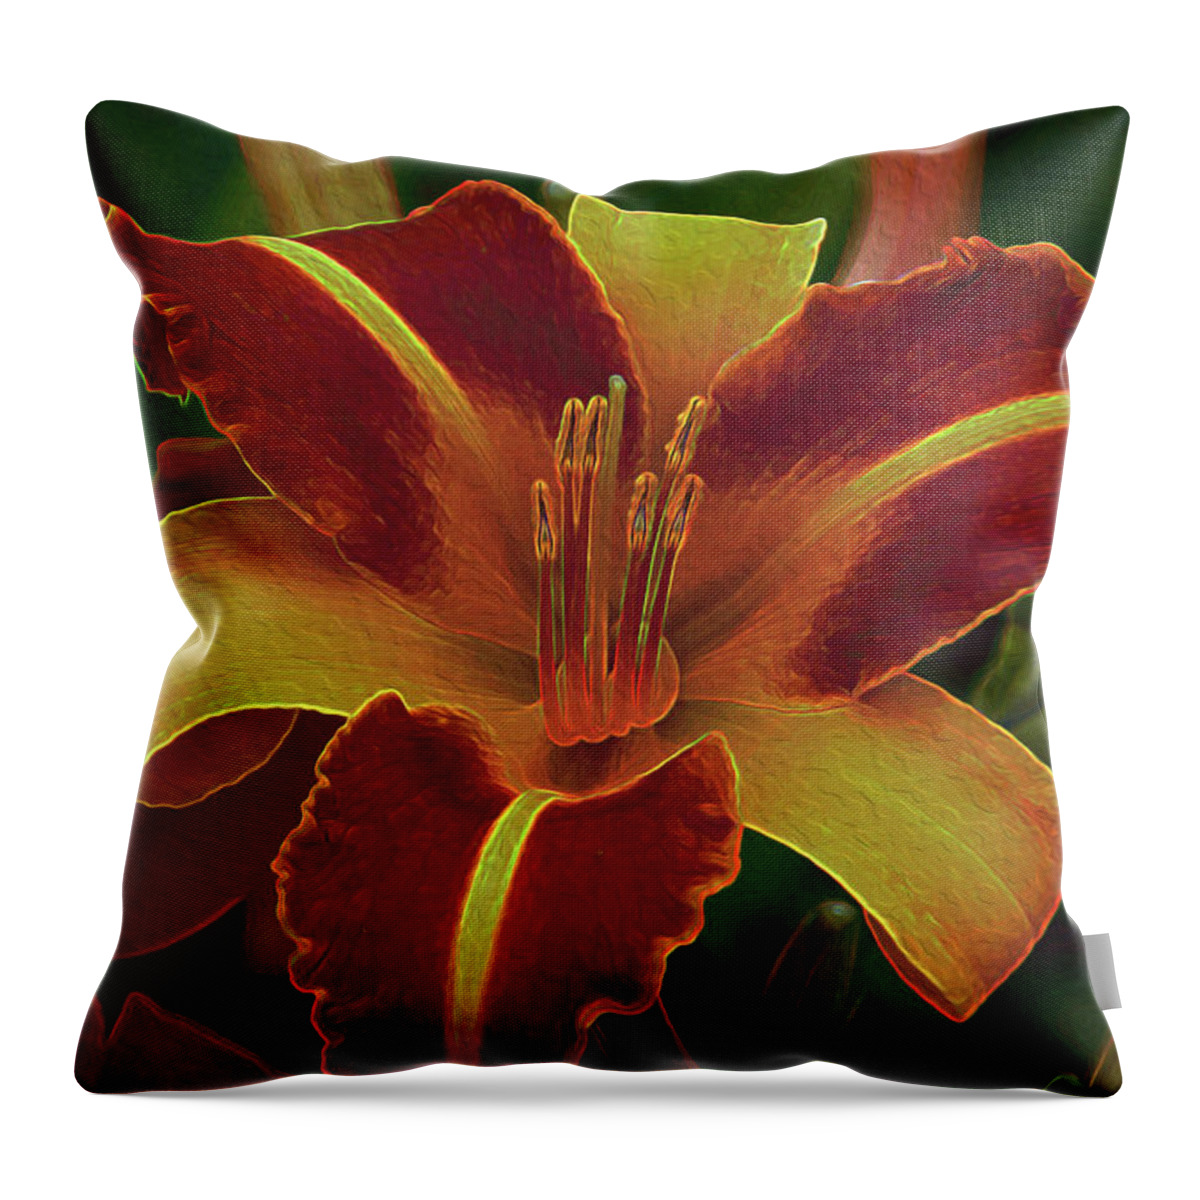  Lily Throw Pillow featuring the photograph Aflame 4 by Lynda Lehmann